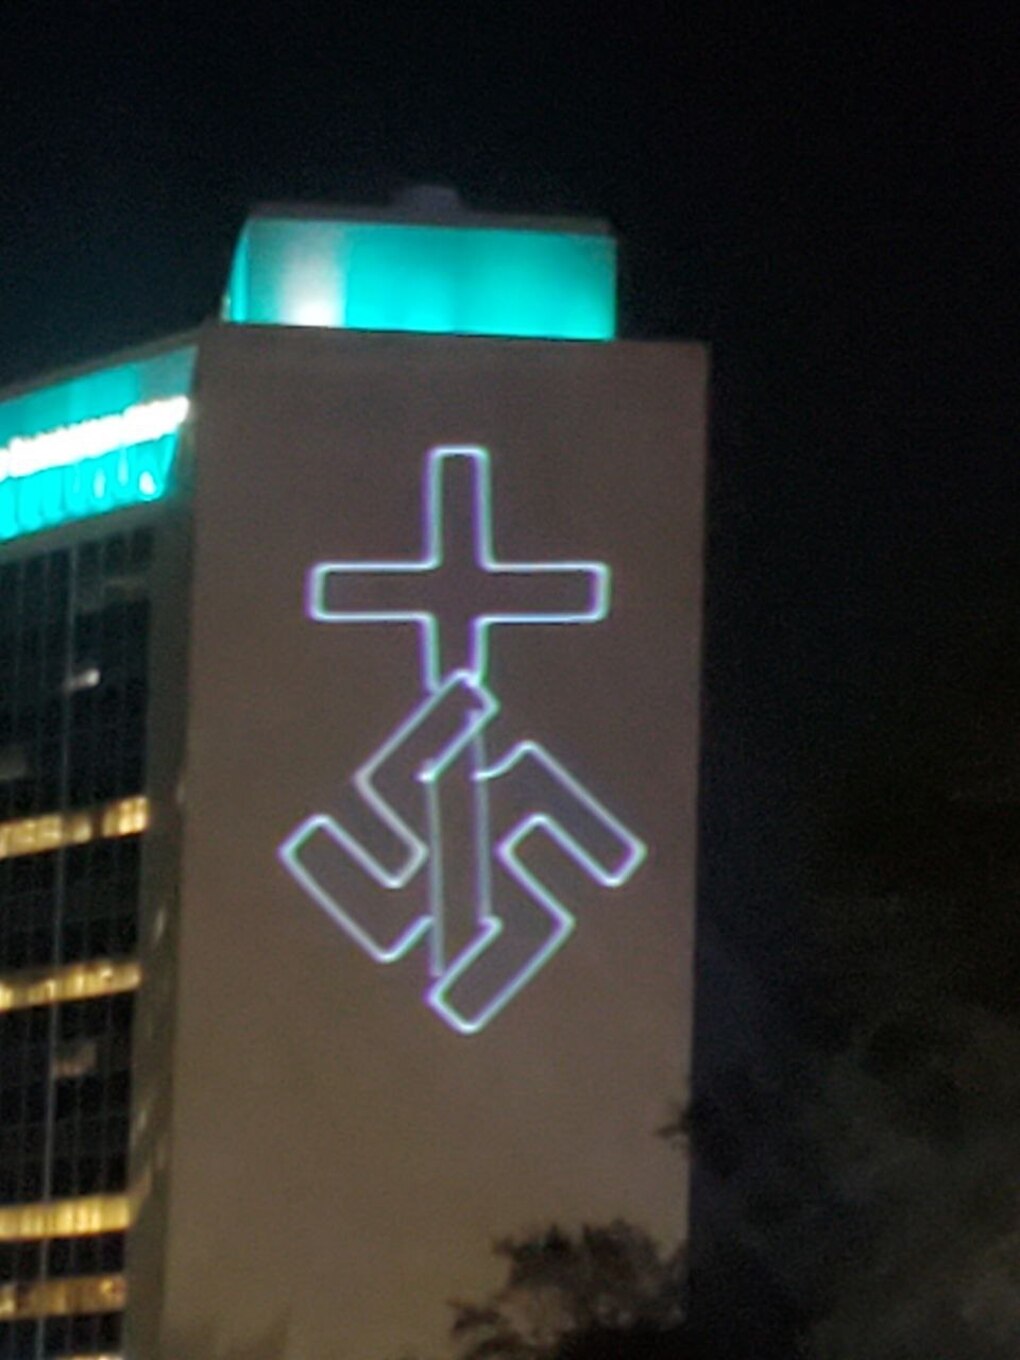 An image of a projection on a building that shows a Christian cross intertwined with a swastika.